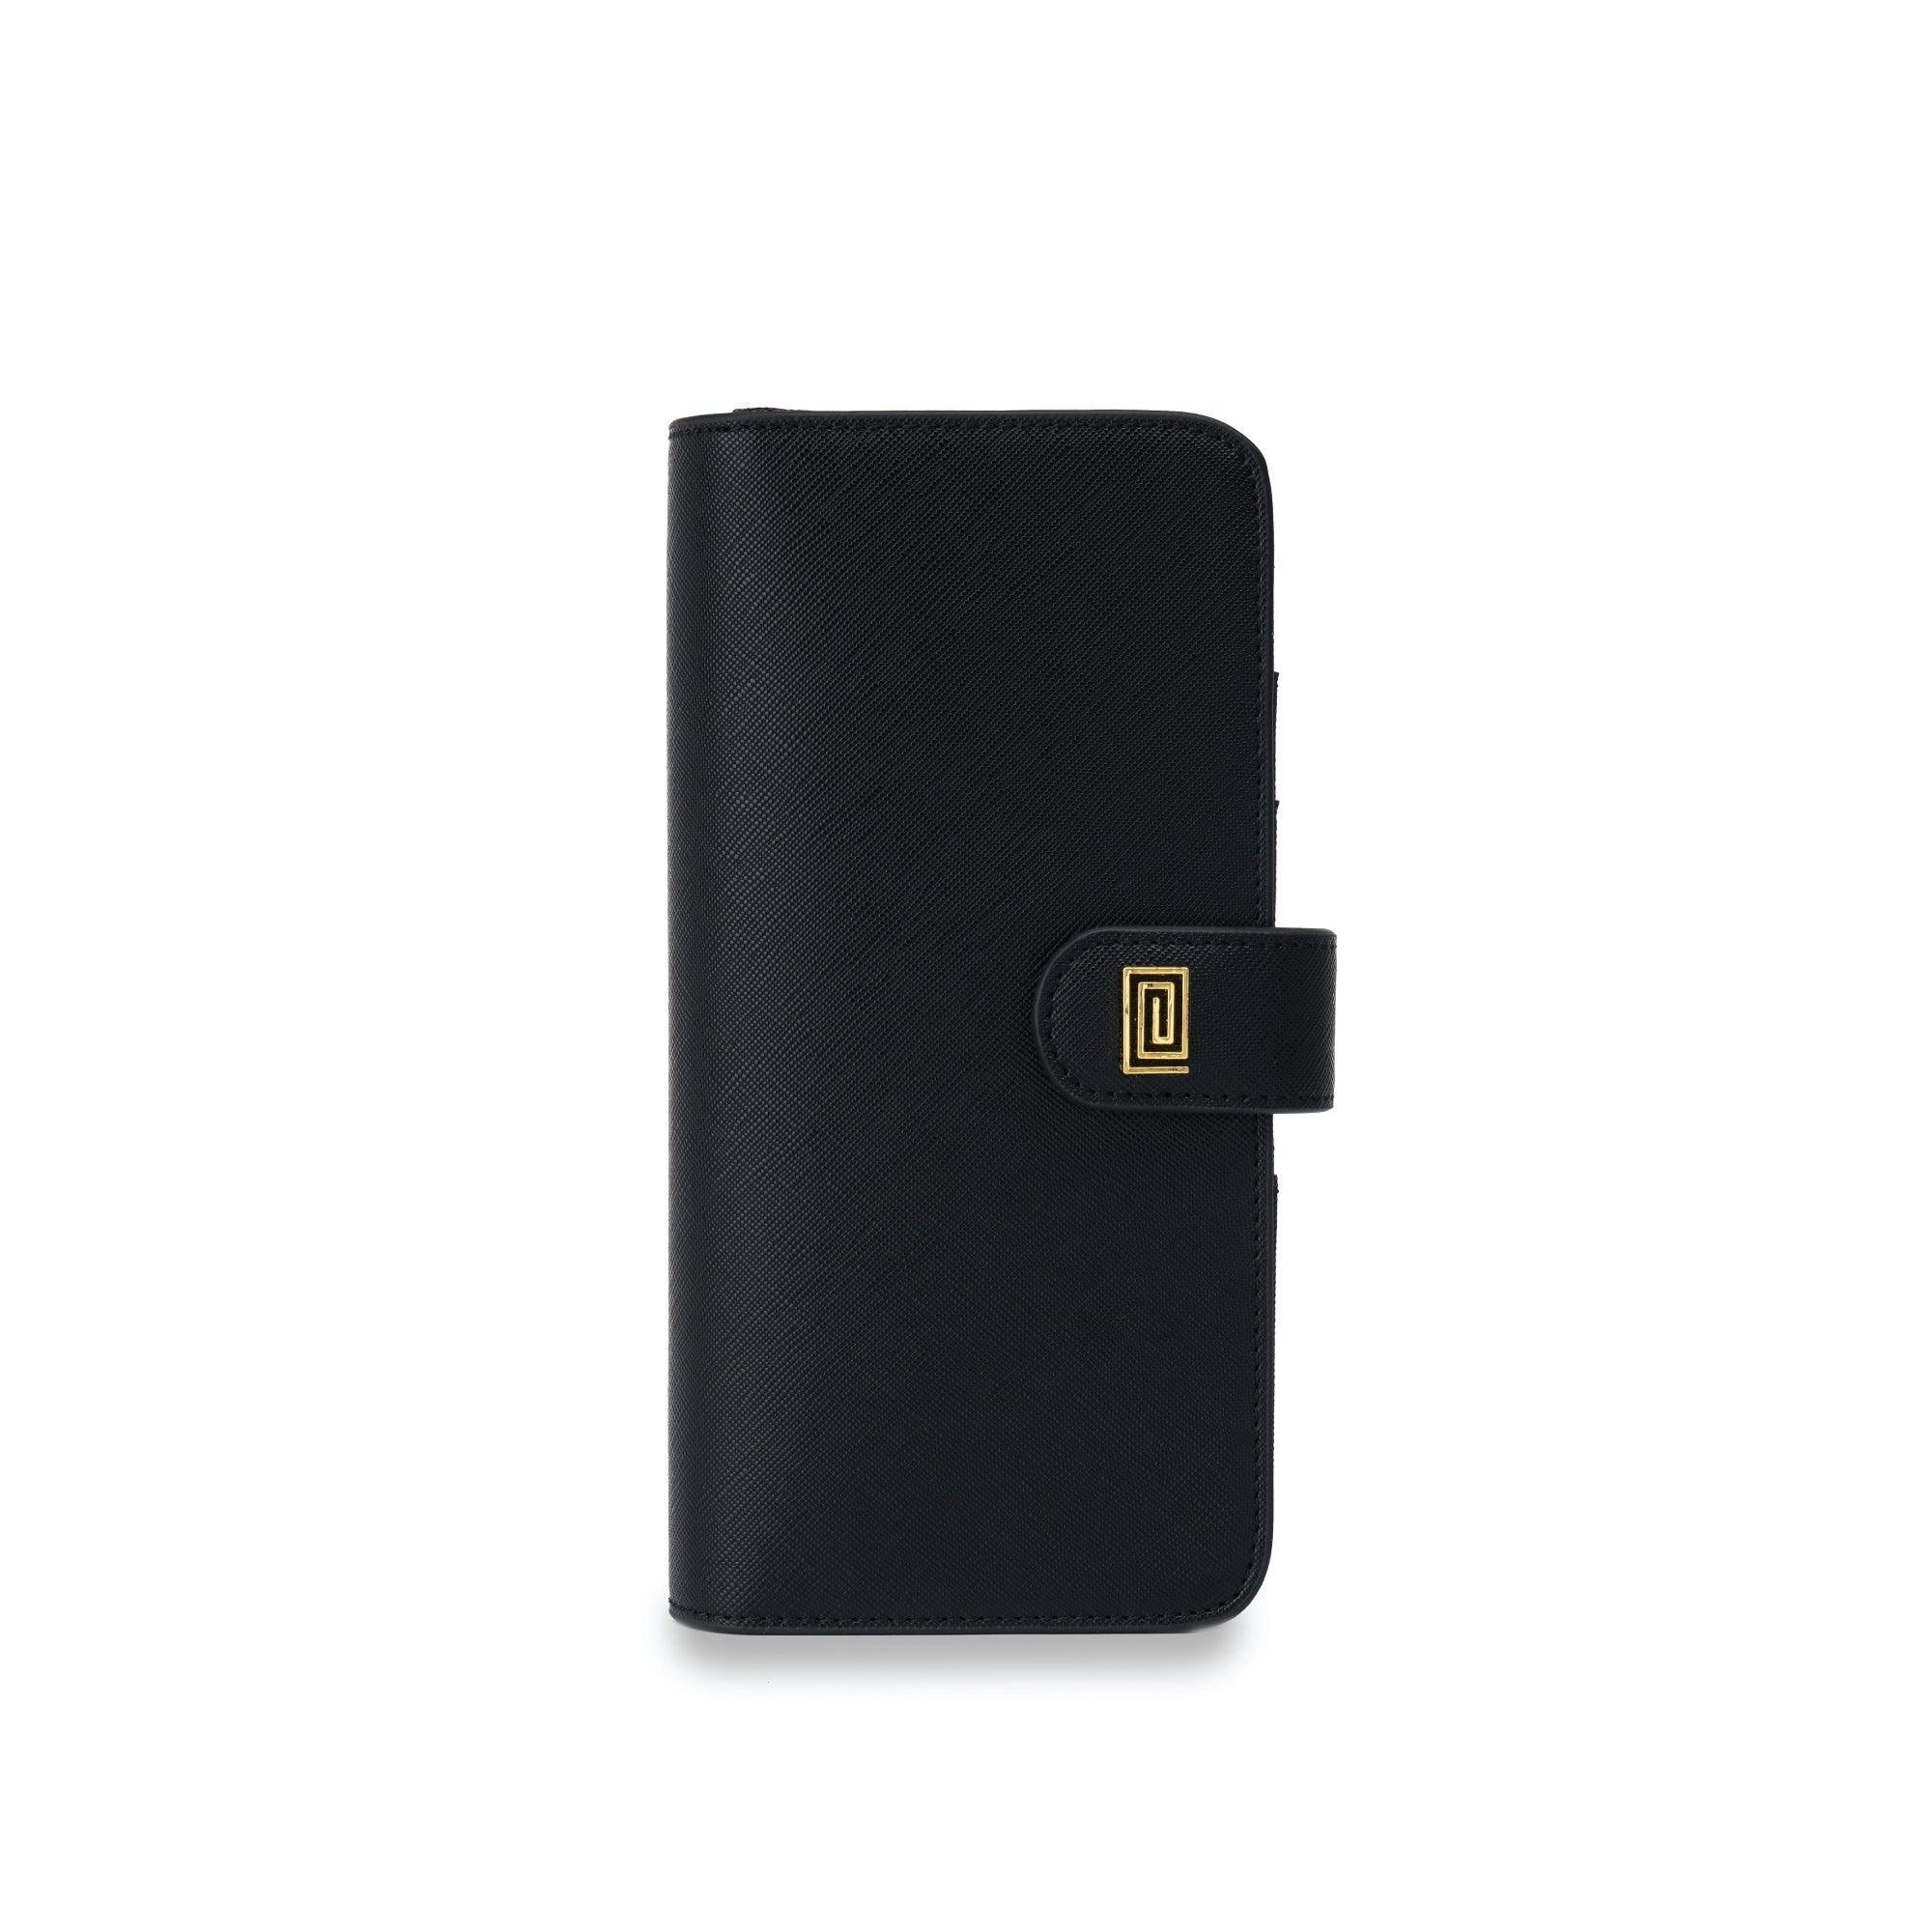 Gold on Jet Black Saffiano Slim Compact | OUTLET | SL5. Slim Compact Wallet Ringless Agenda | Planner Cover | Final Sale | NOTIQ